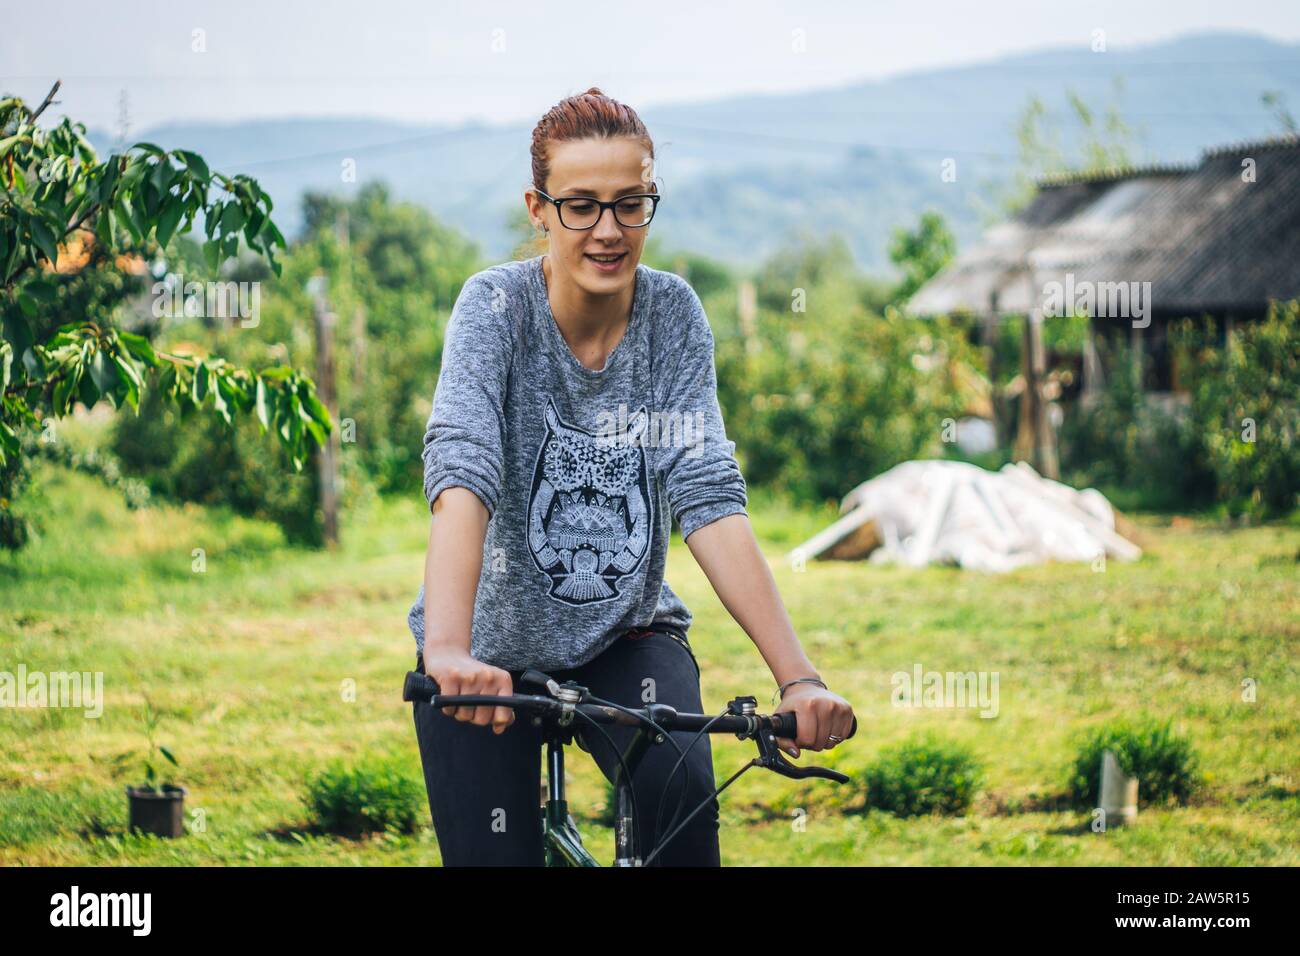 Woman riding a bicycle on a farm Stock Photo